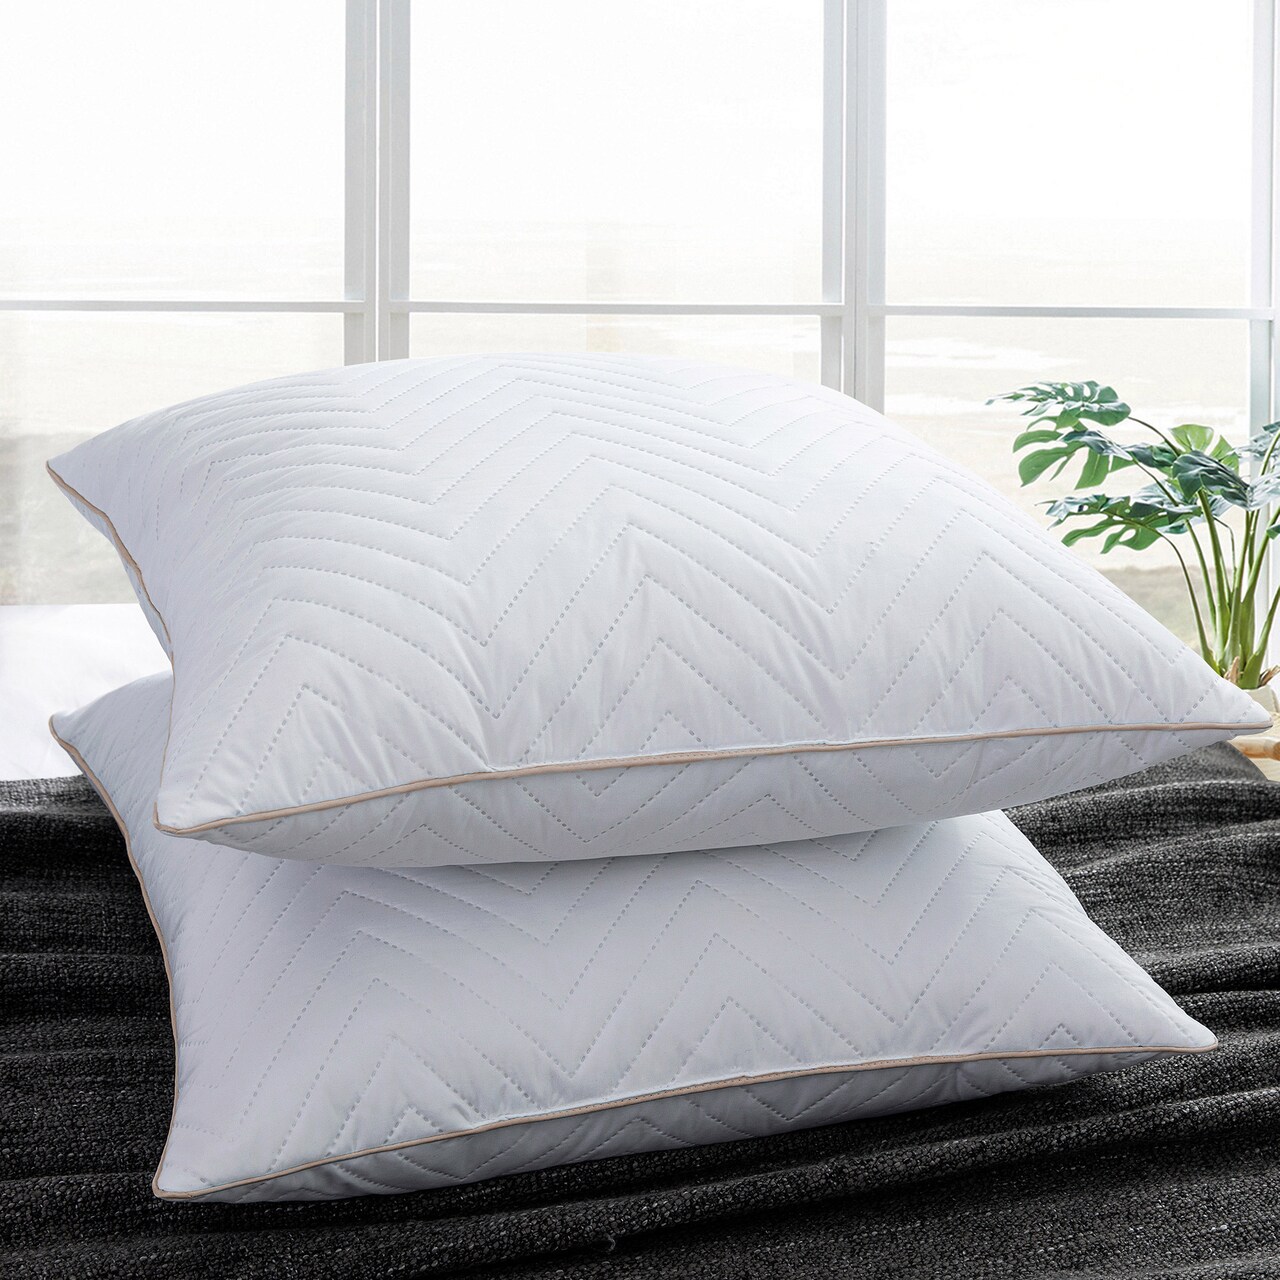 Peace Nest 2 Pack Feather Down Throw Pillow Insert, White, 18 X